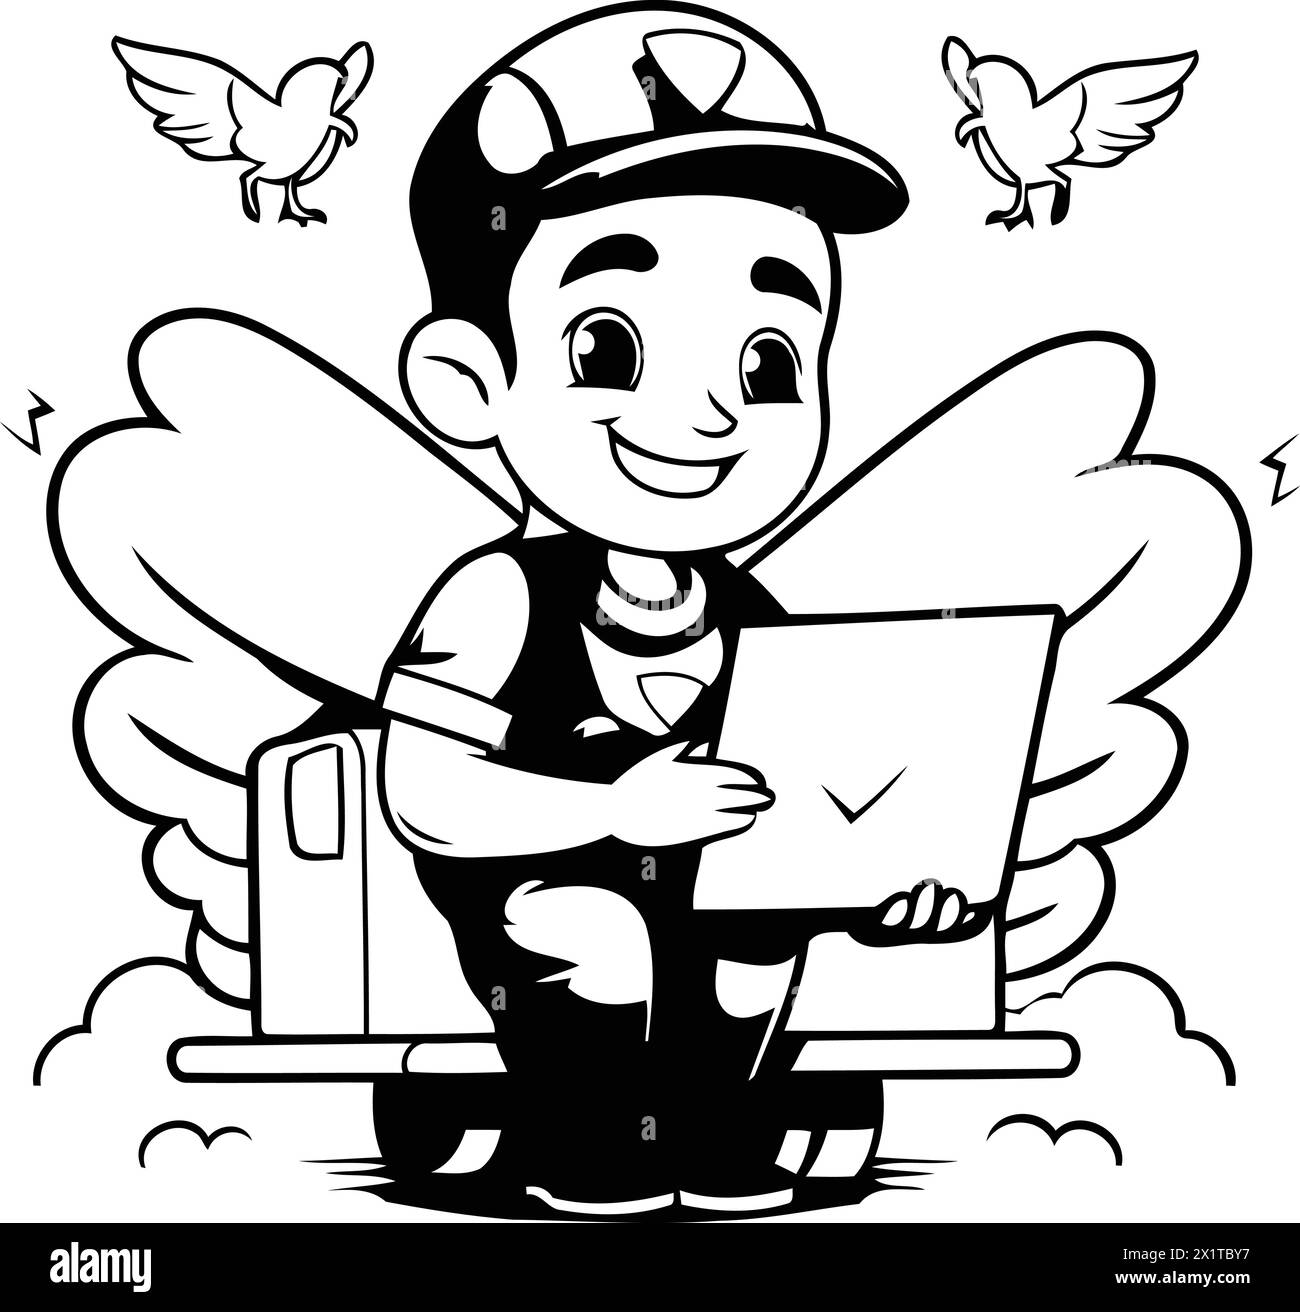 Superhero boy cartoon character with laptop and wings. Vector illustration. Stock Vector